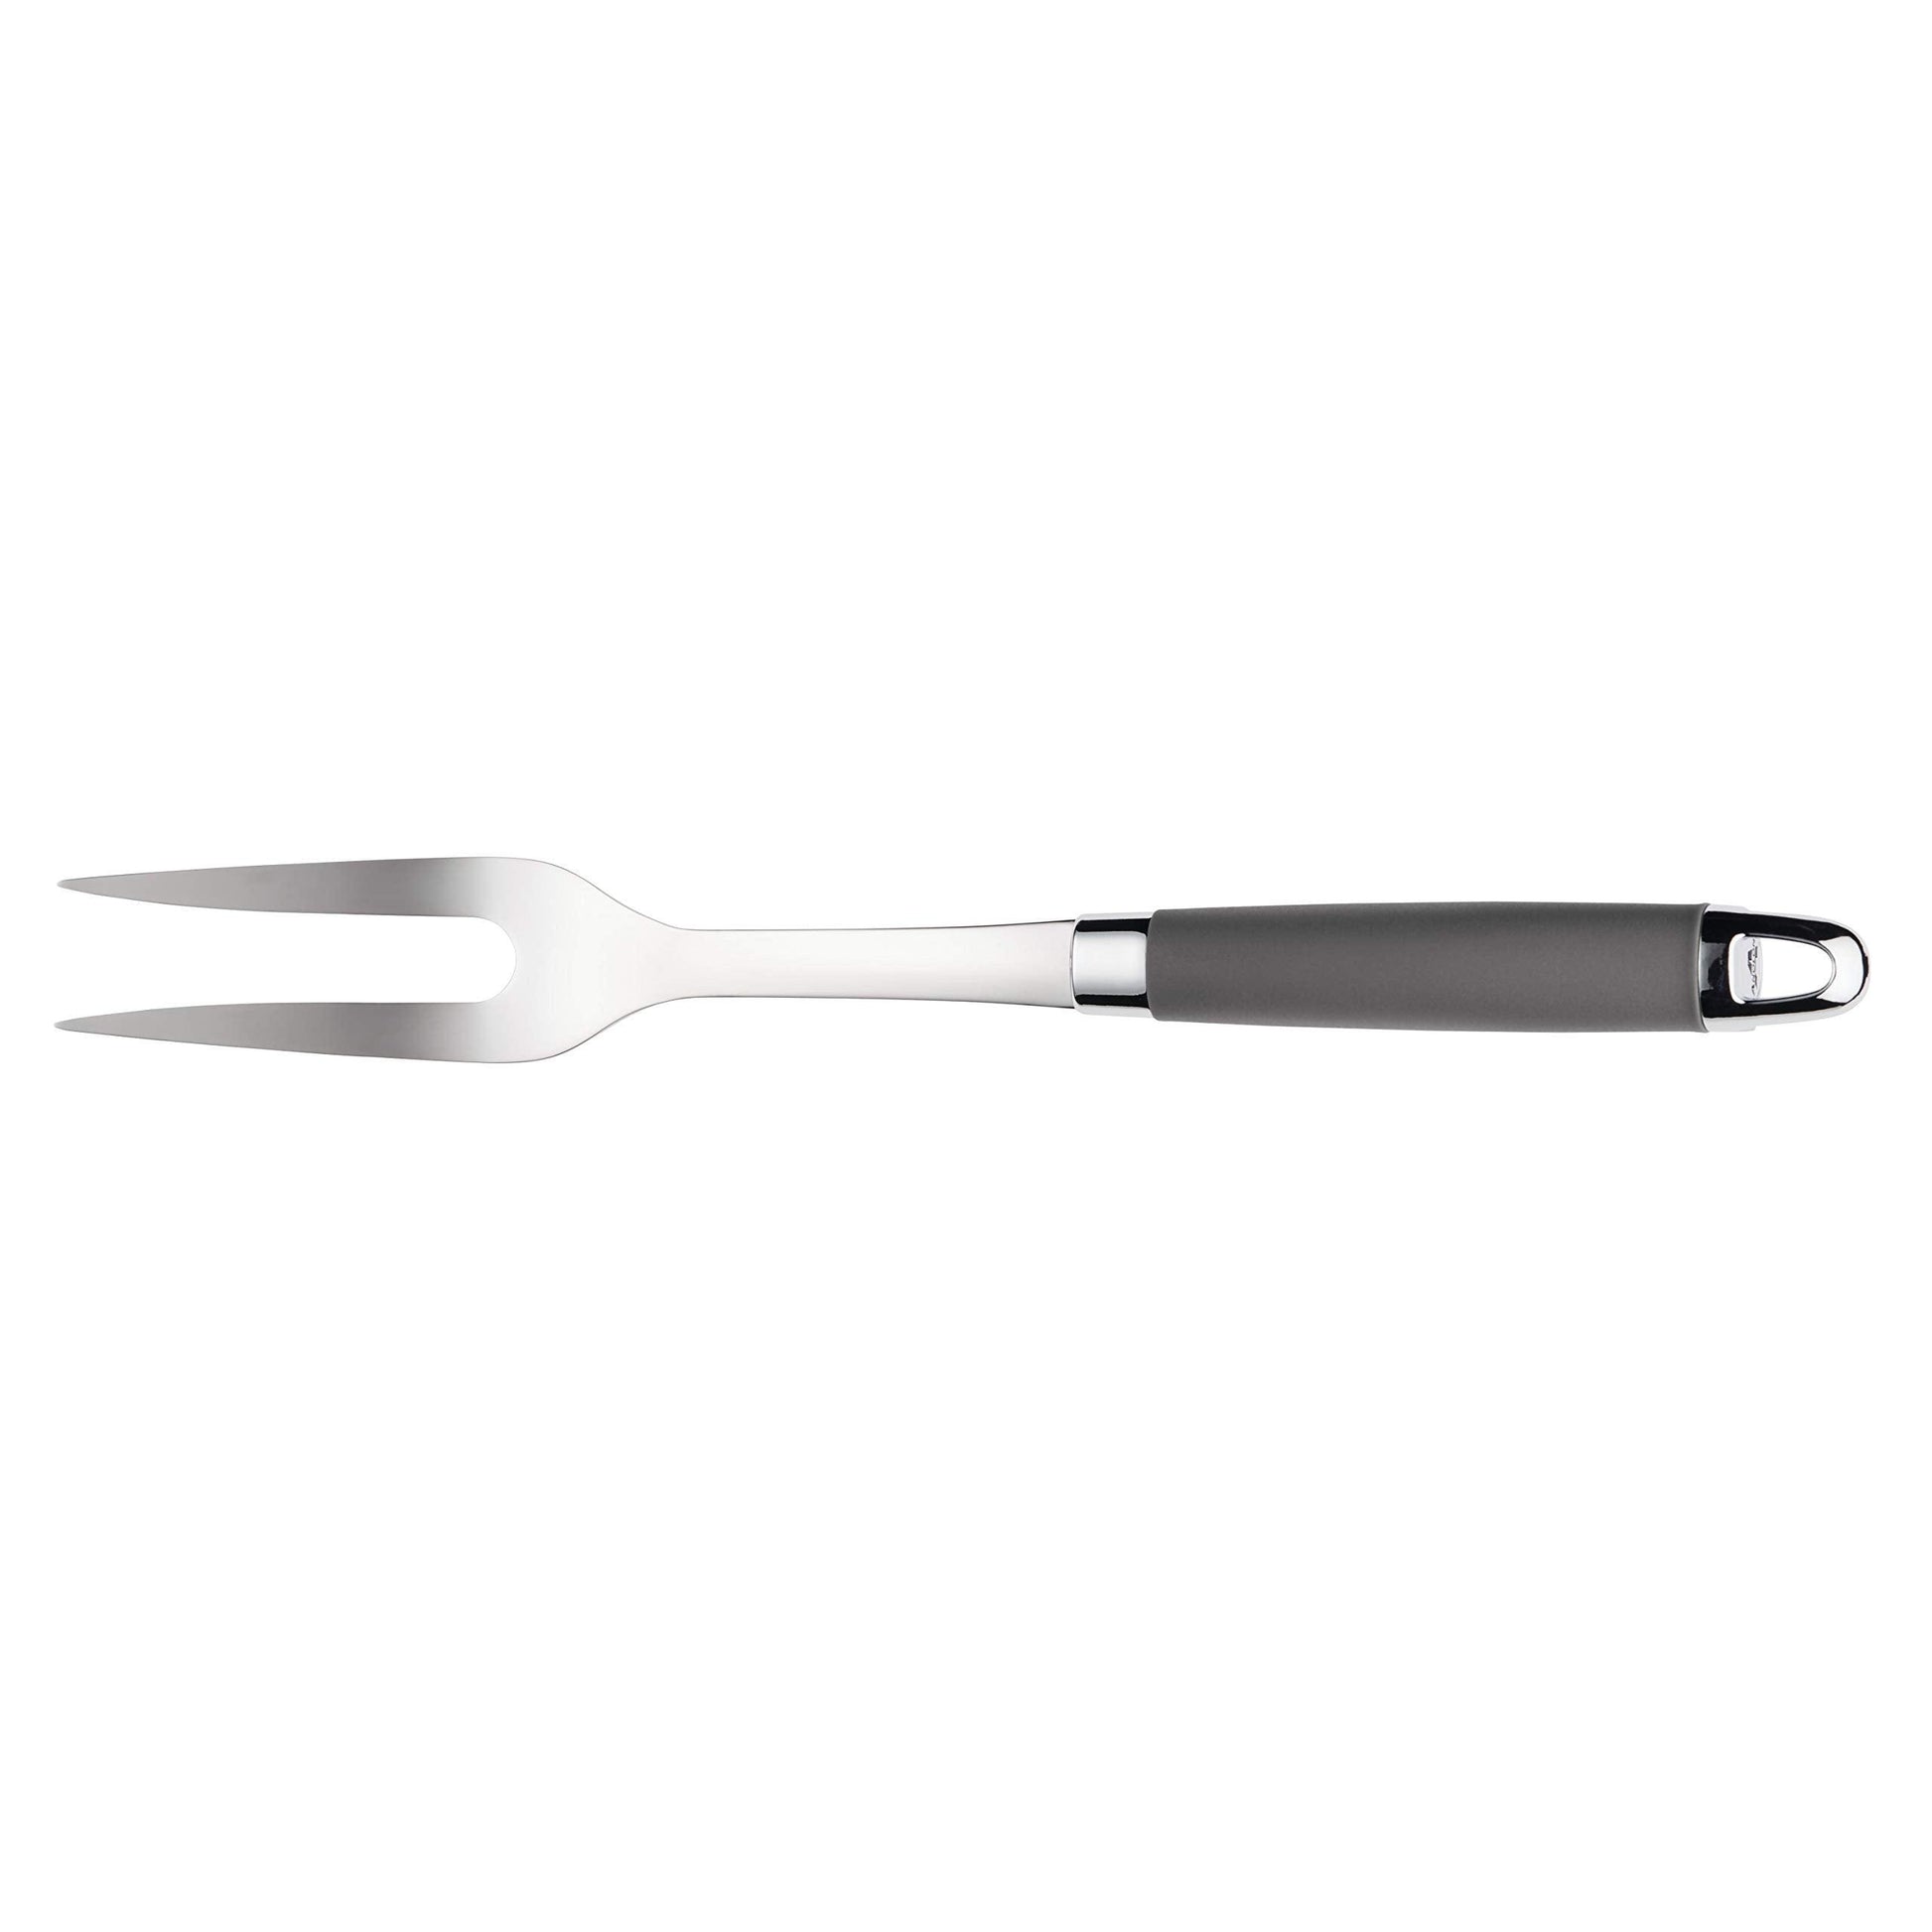 Anolon SureGrip Stainless Steel Meat Fork/Kitchen Tool, 13.25 Inch, Gray,46288 - CookCave